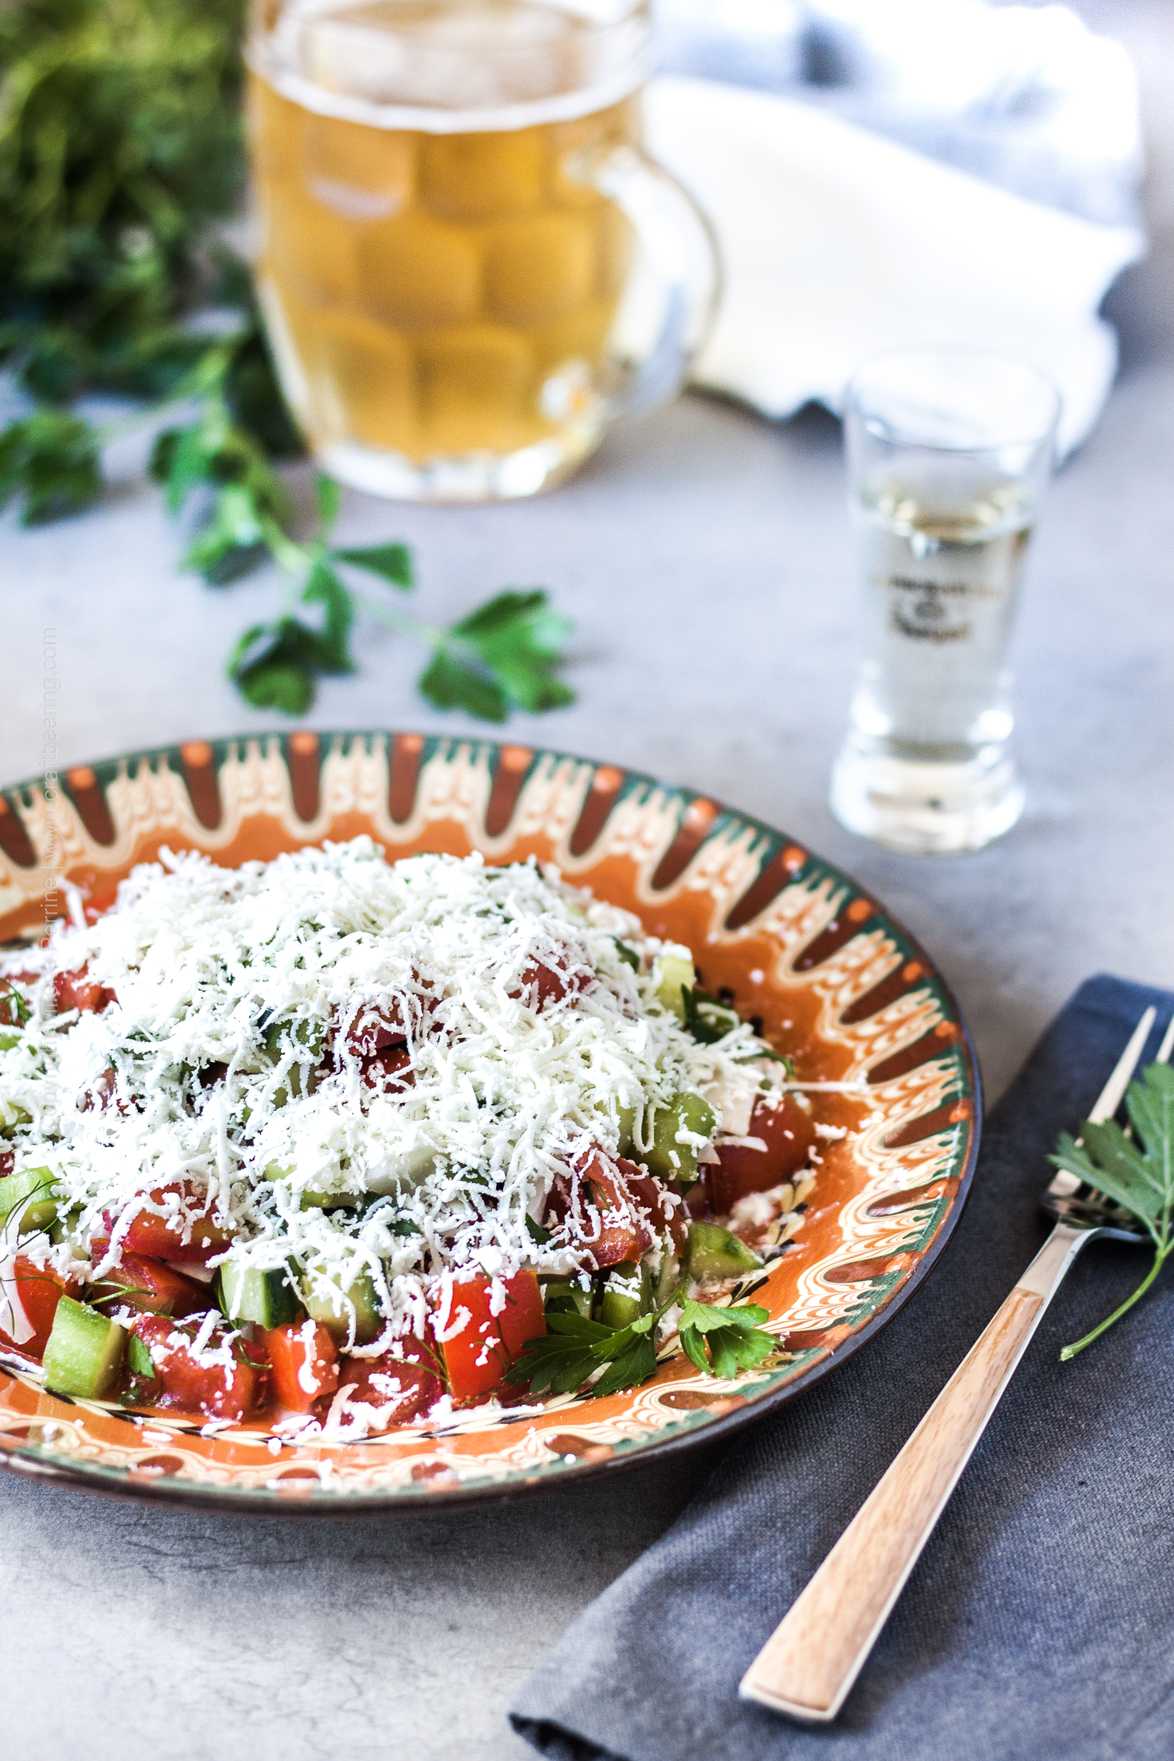 Shopska salata served in traditional Bulgarian plate along with a shot of rakiya. The feta is very finely grated on top of the cucumber, tomato, onion and pepper medley.